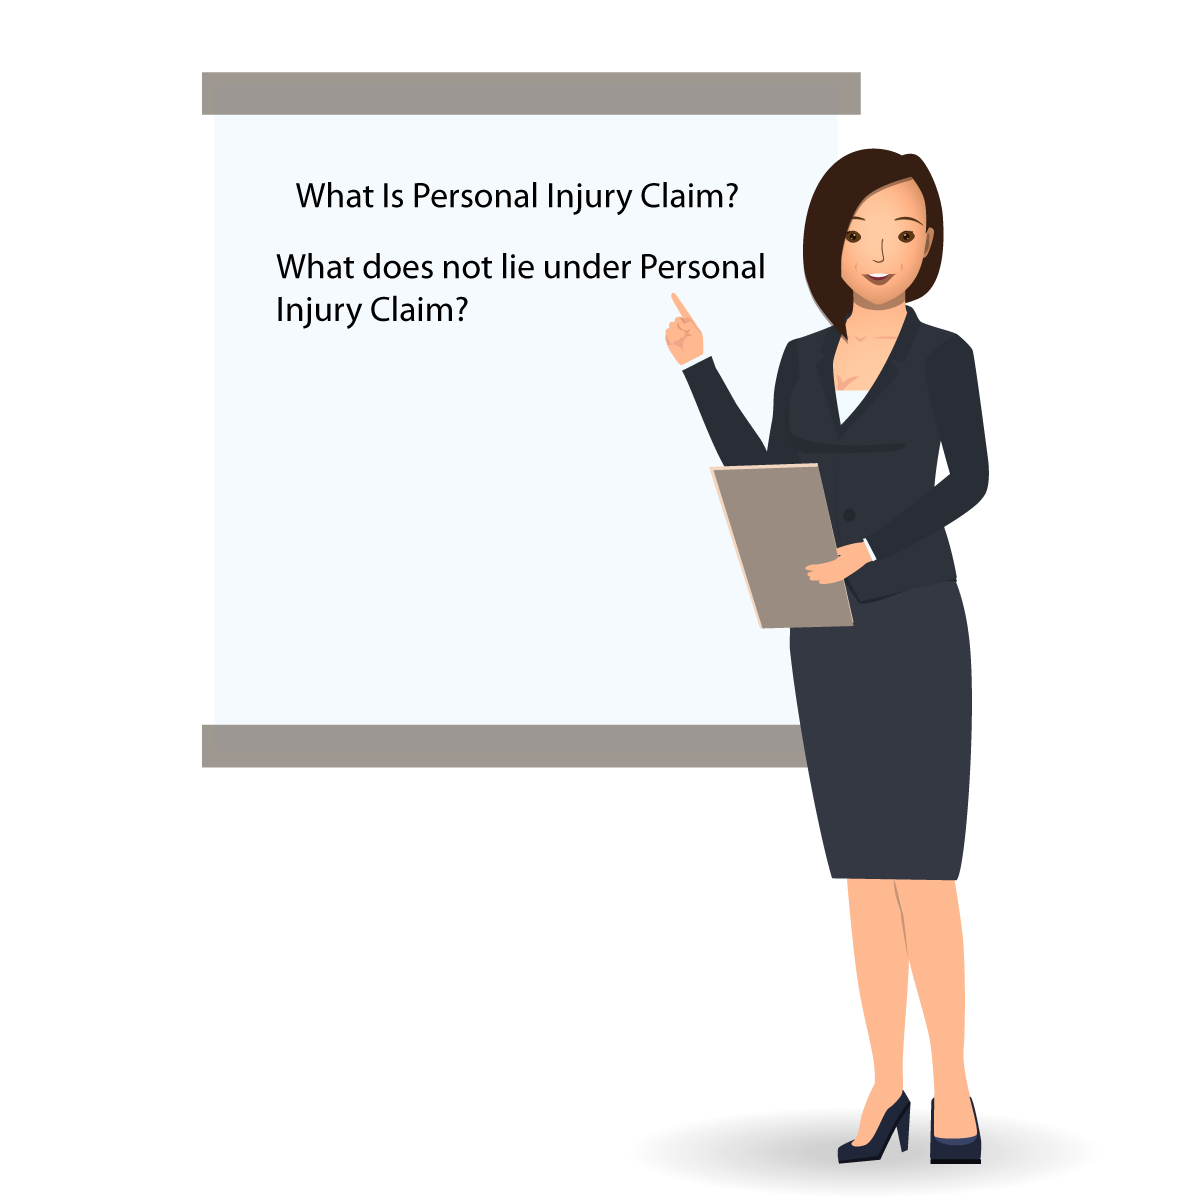 What is Personal Injury